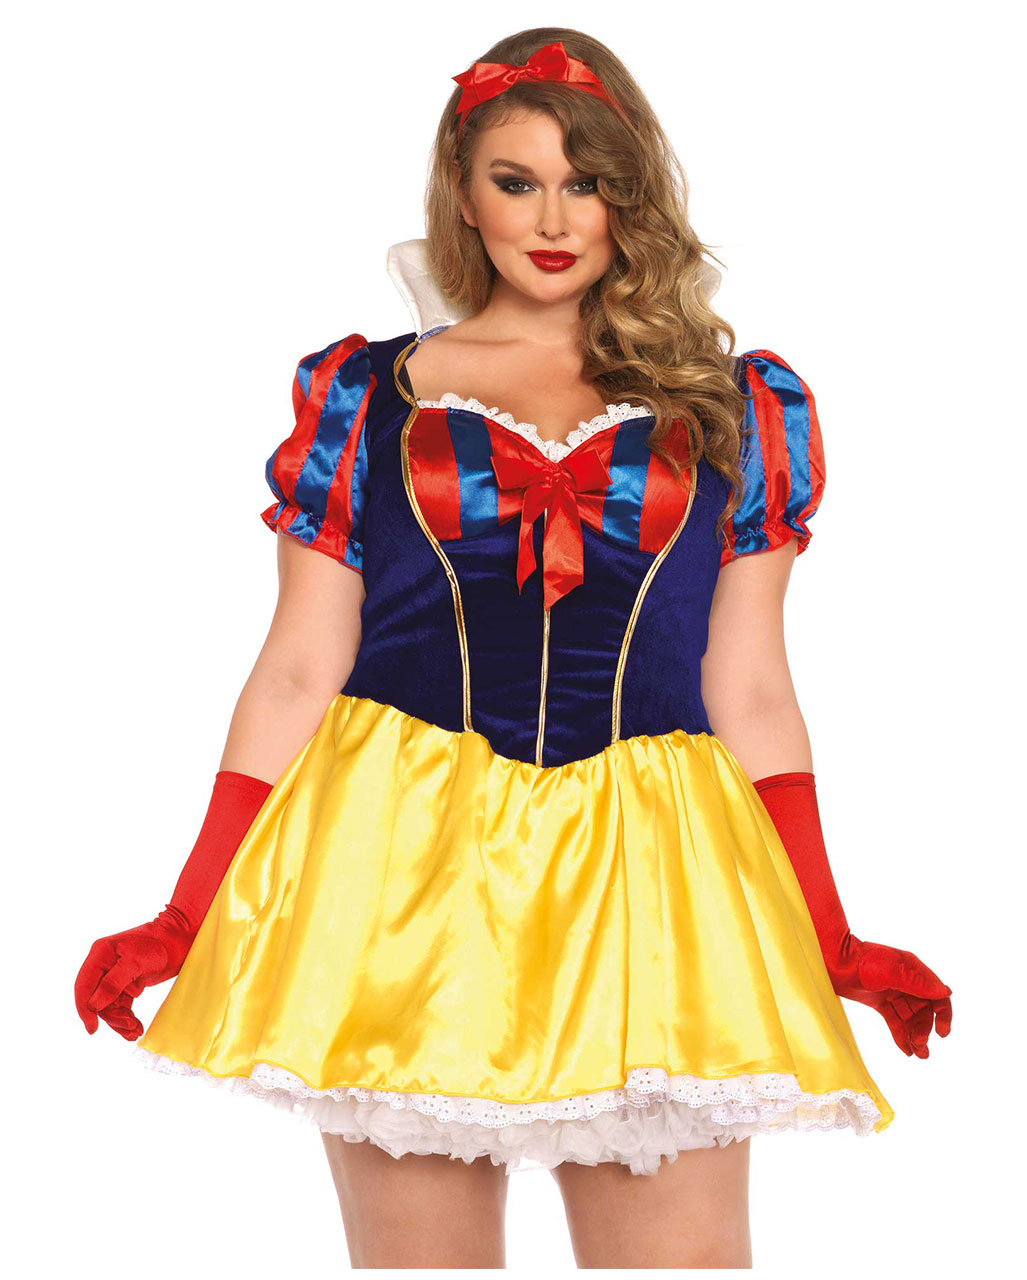 Sexy Snow White Costume Plus Size 1x2x For Carnival Horror 0057